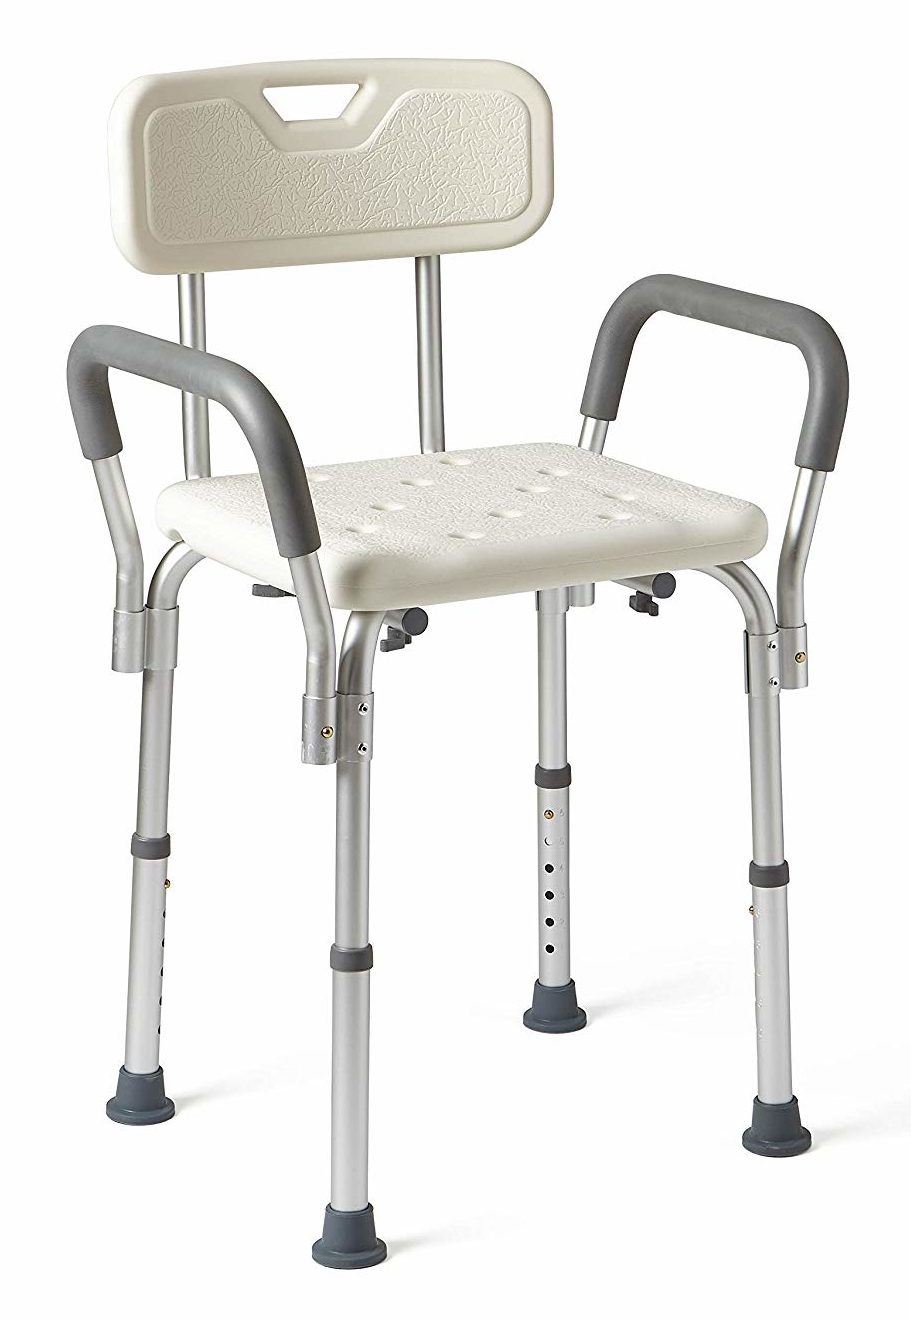 Shower chair for bathing with a disability.